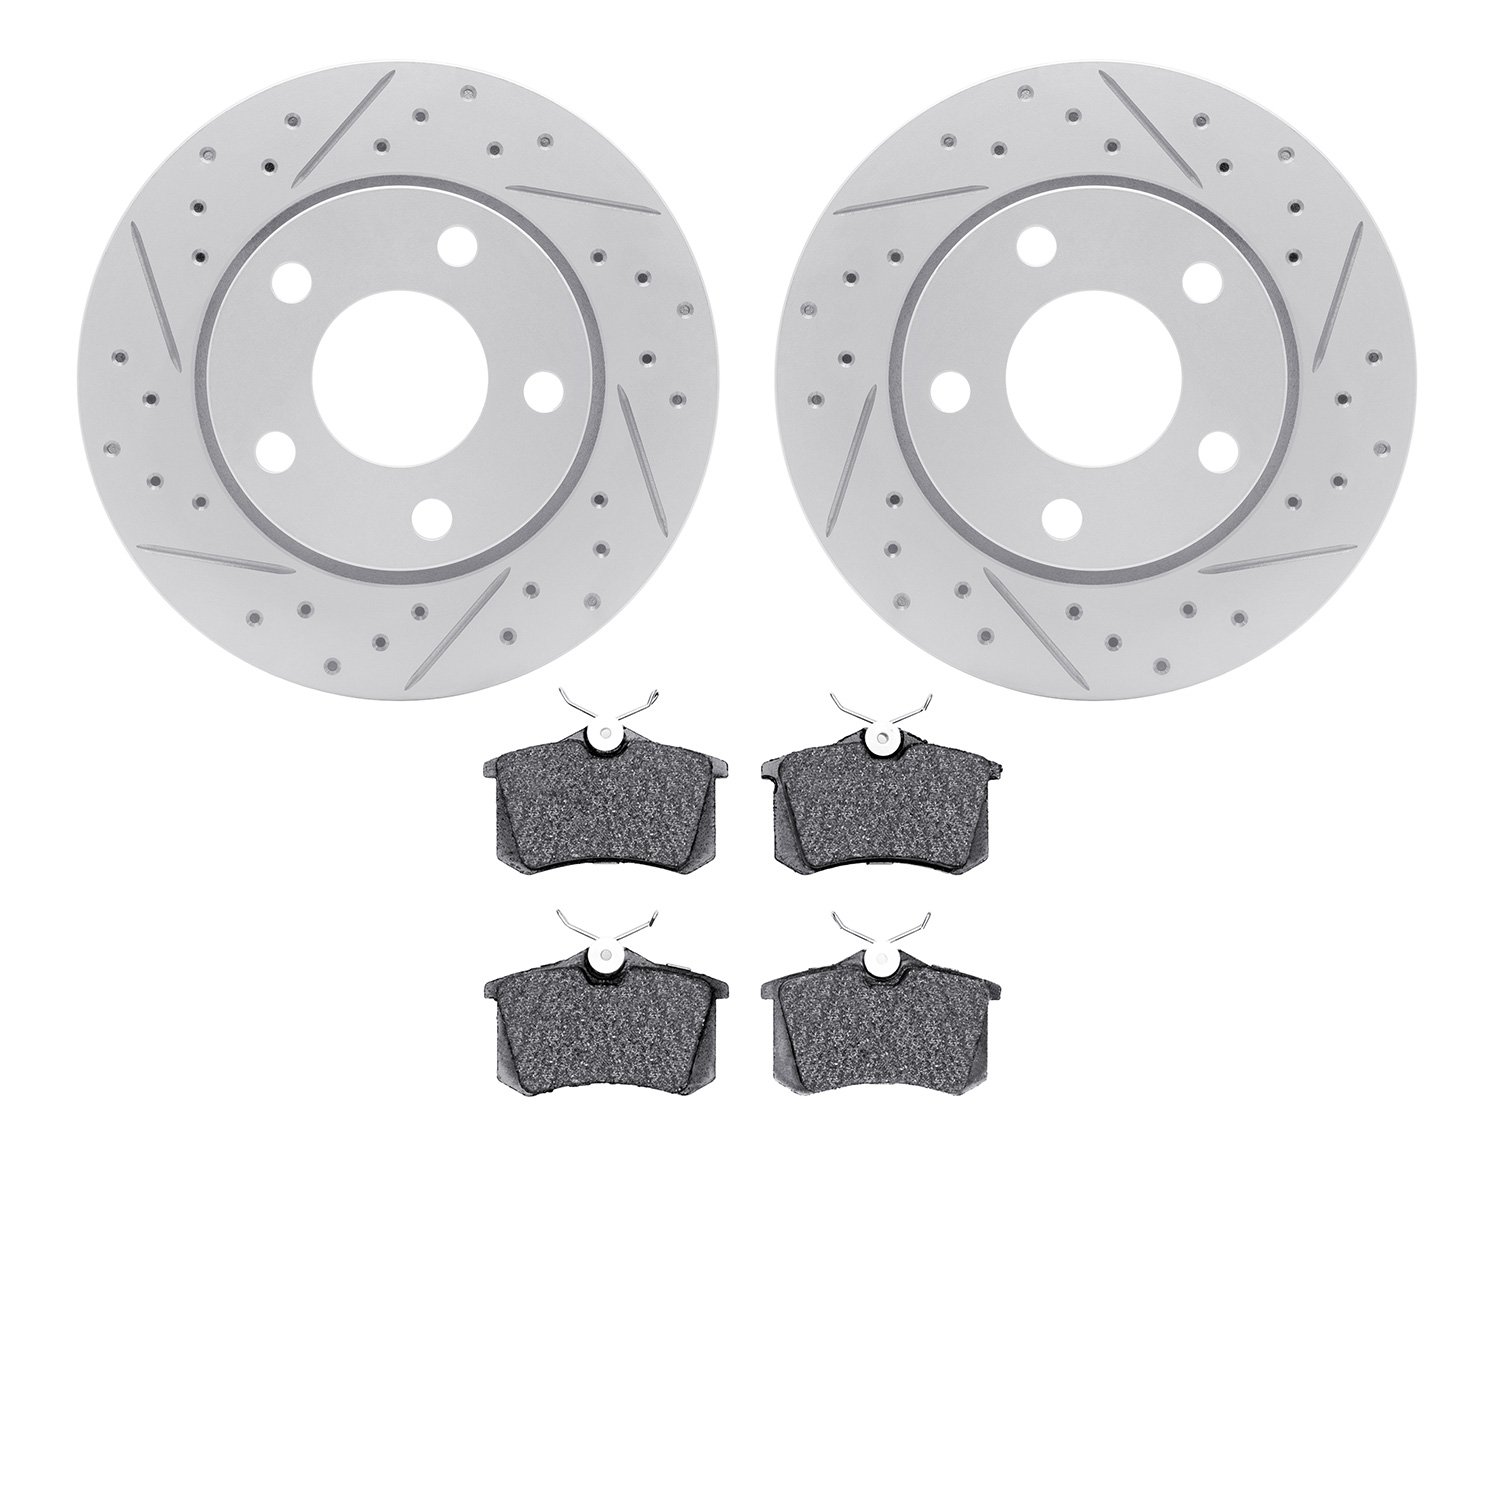 2502-73014 Geoperformance Drilled/Slotted Rotors w/5000 Advanced Brake Pads Kit, 2000-2002 Audi/Volkswagen, Position: Rear